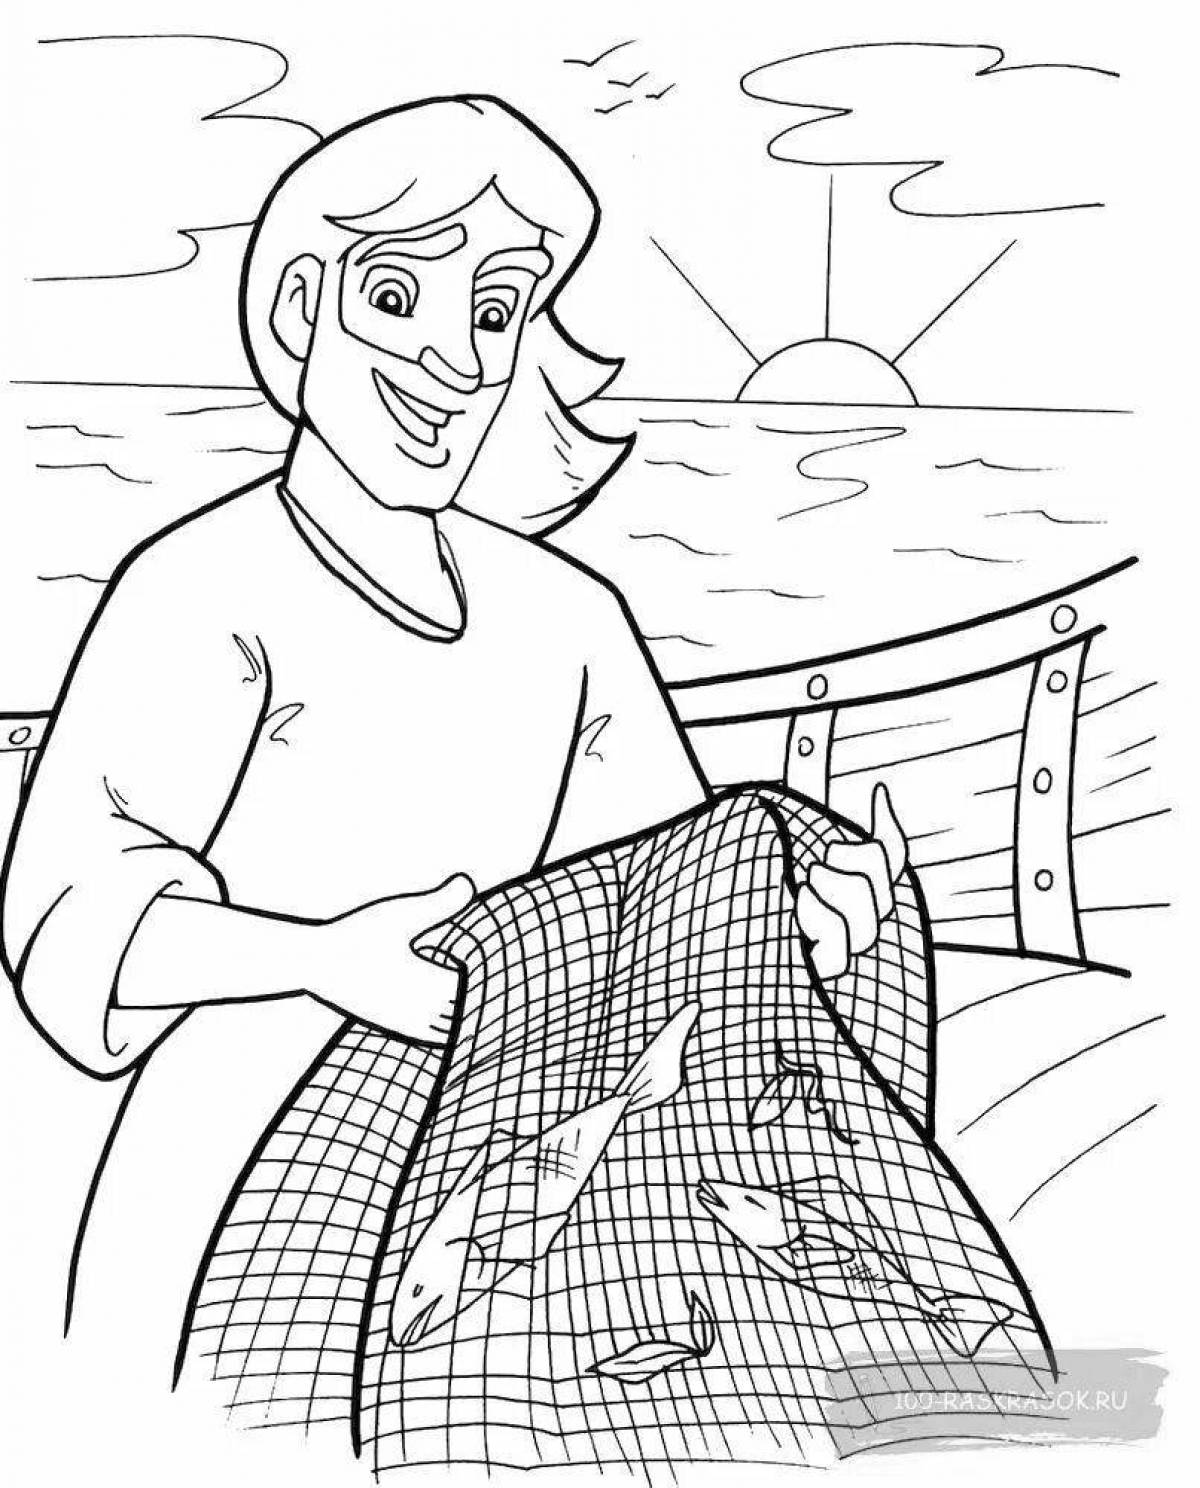 Elegant coloring book based on the tale of the fisherman and the fish drawing